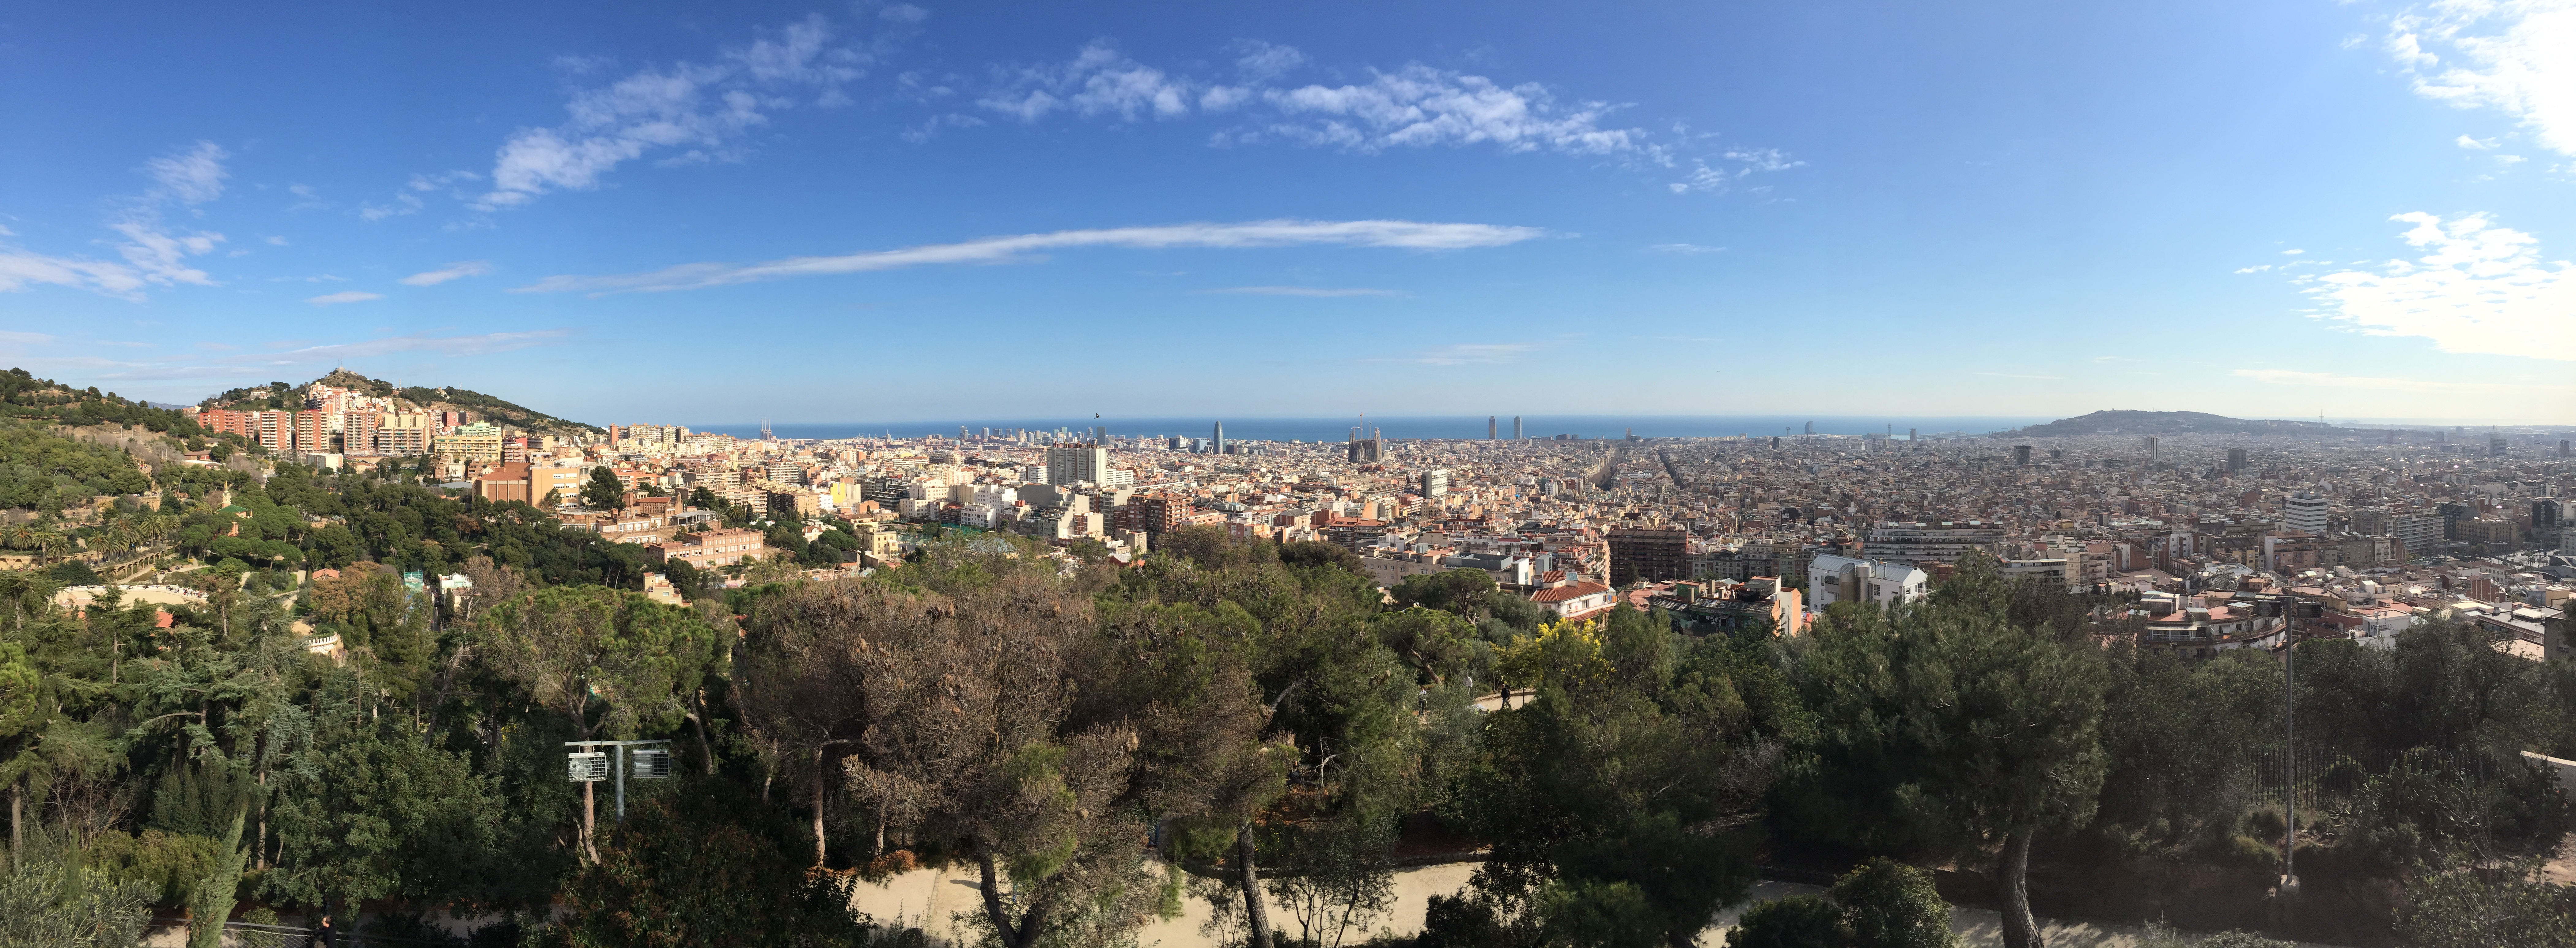 View over Barcelona from Parc Güell